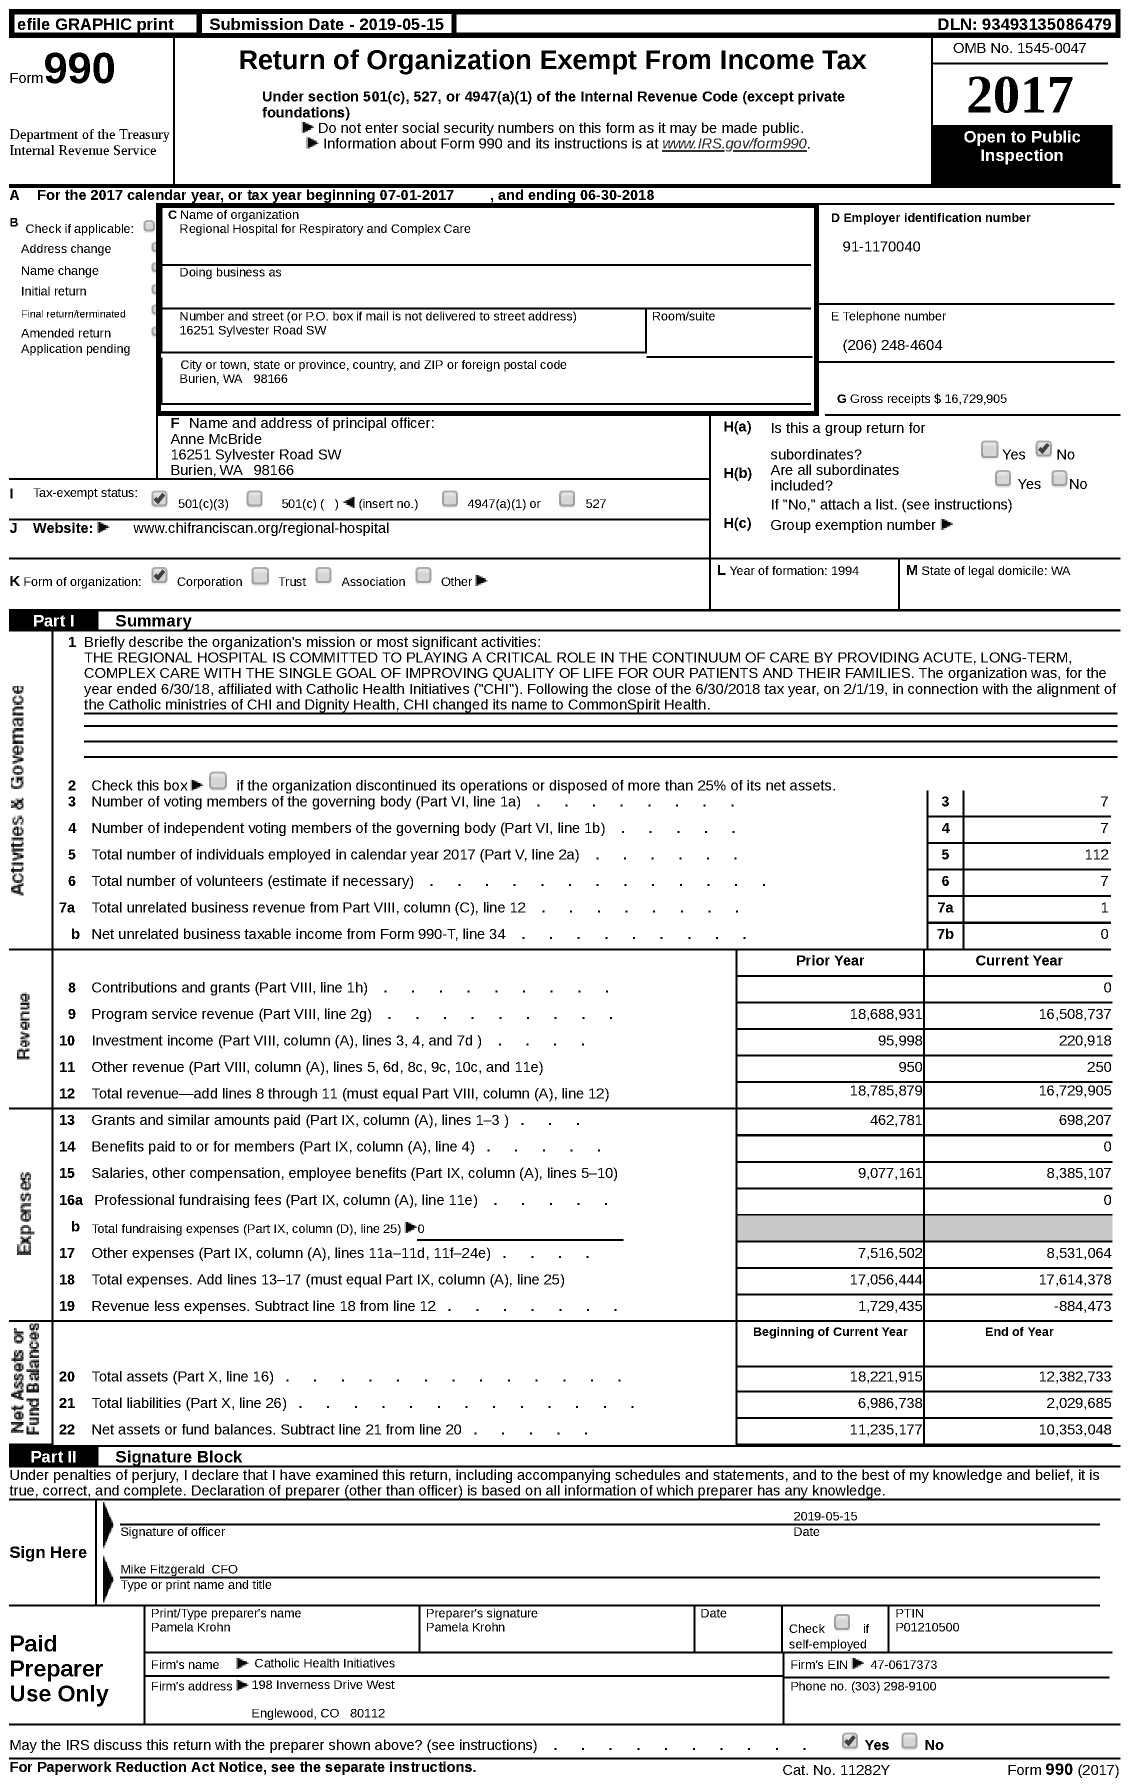 Image of first page of 2017 Form 990 for Regional Hospital